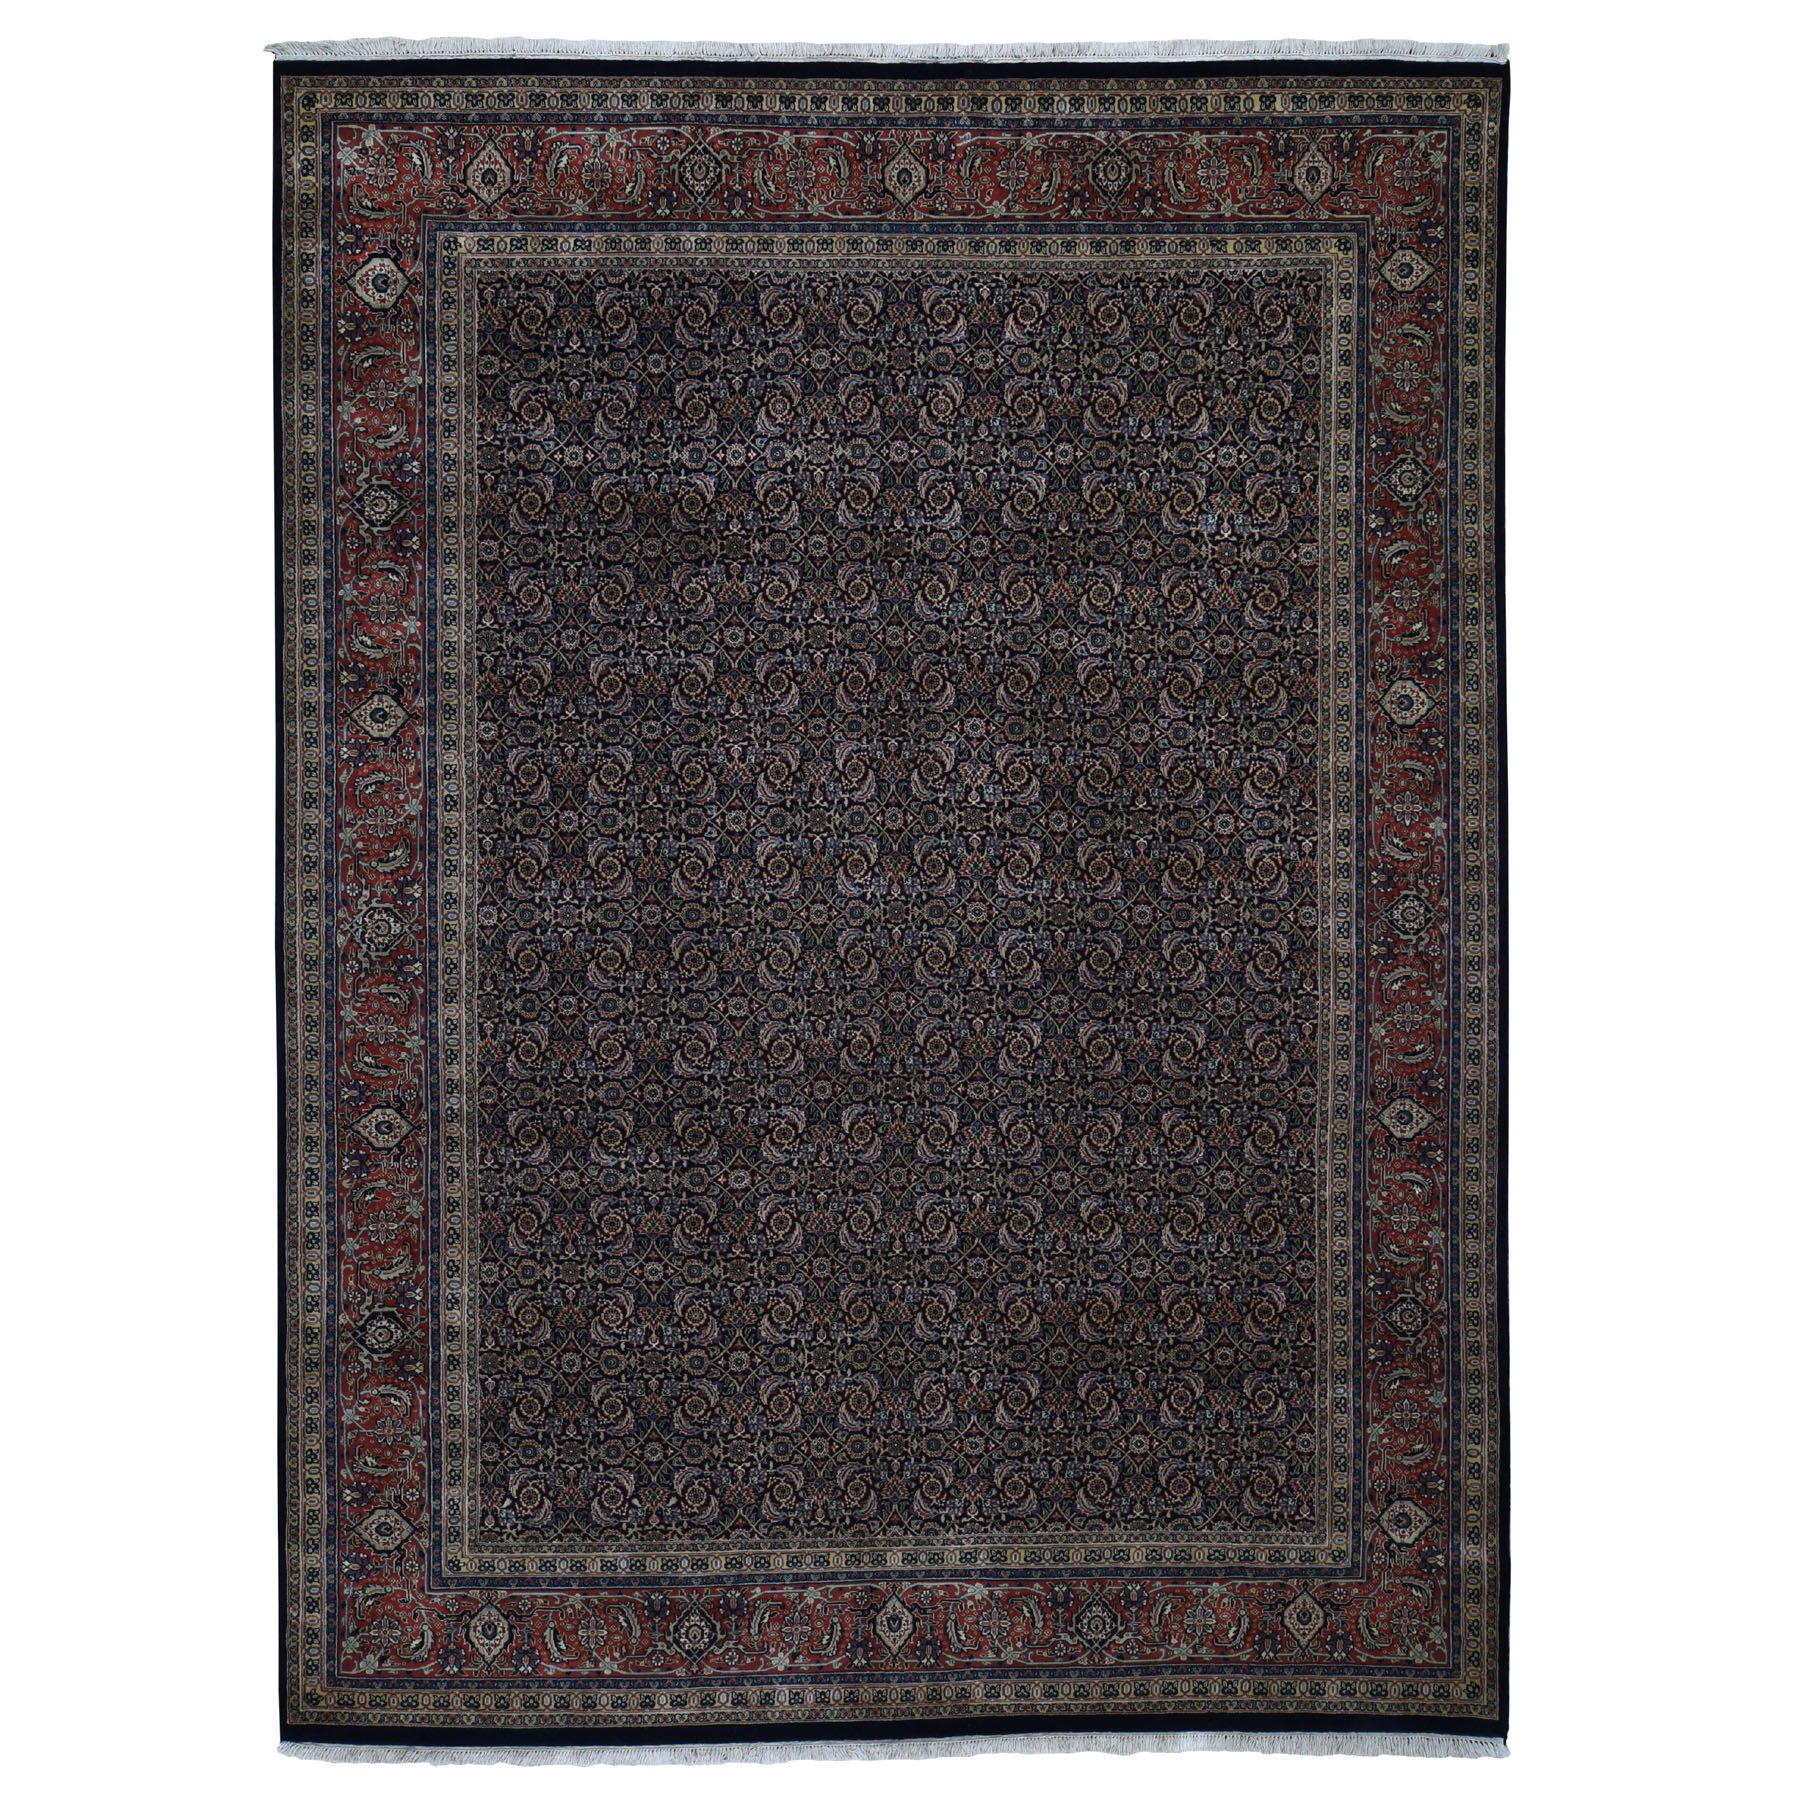 9'X12'3" Herati Fish Design 175 Kpsi Hand Knotted Wool And Silk Oriental Rug moad8d7b